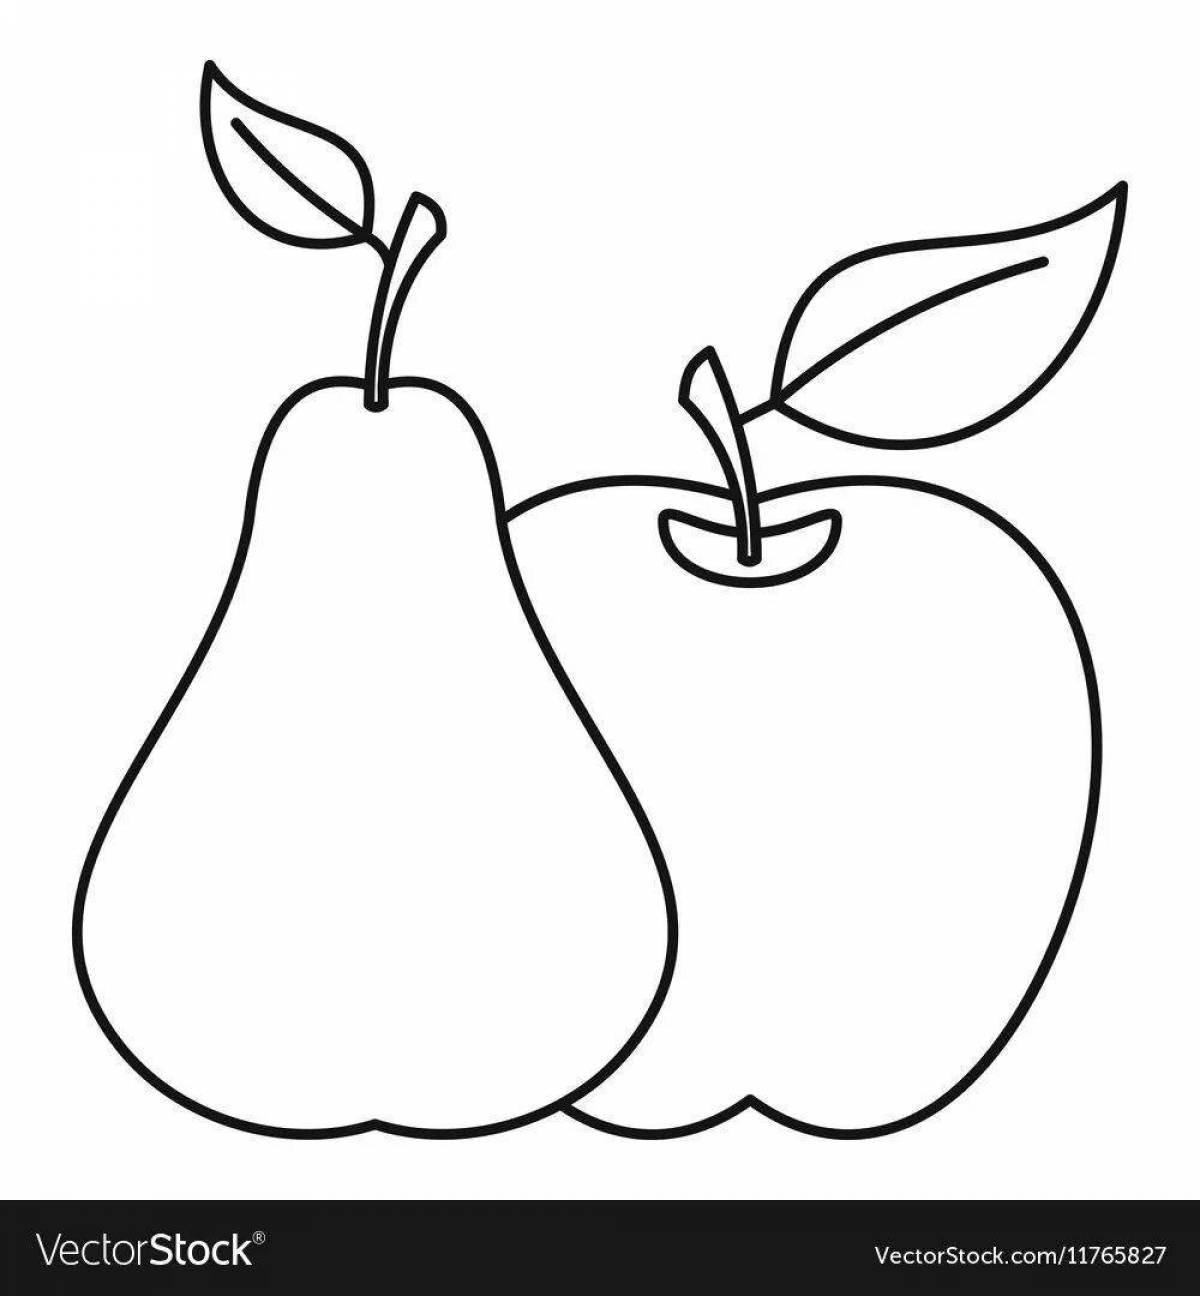 Wonderful coloring apple and pear